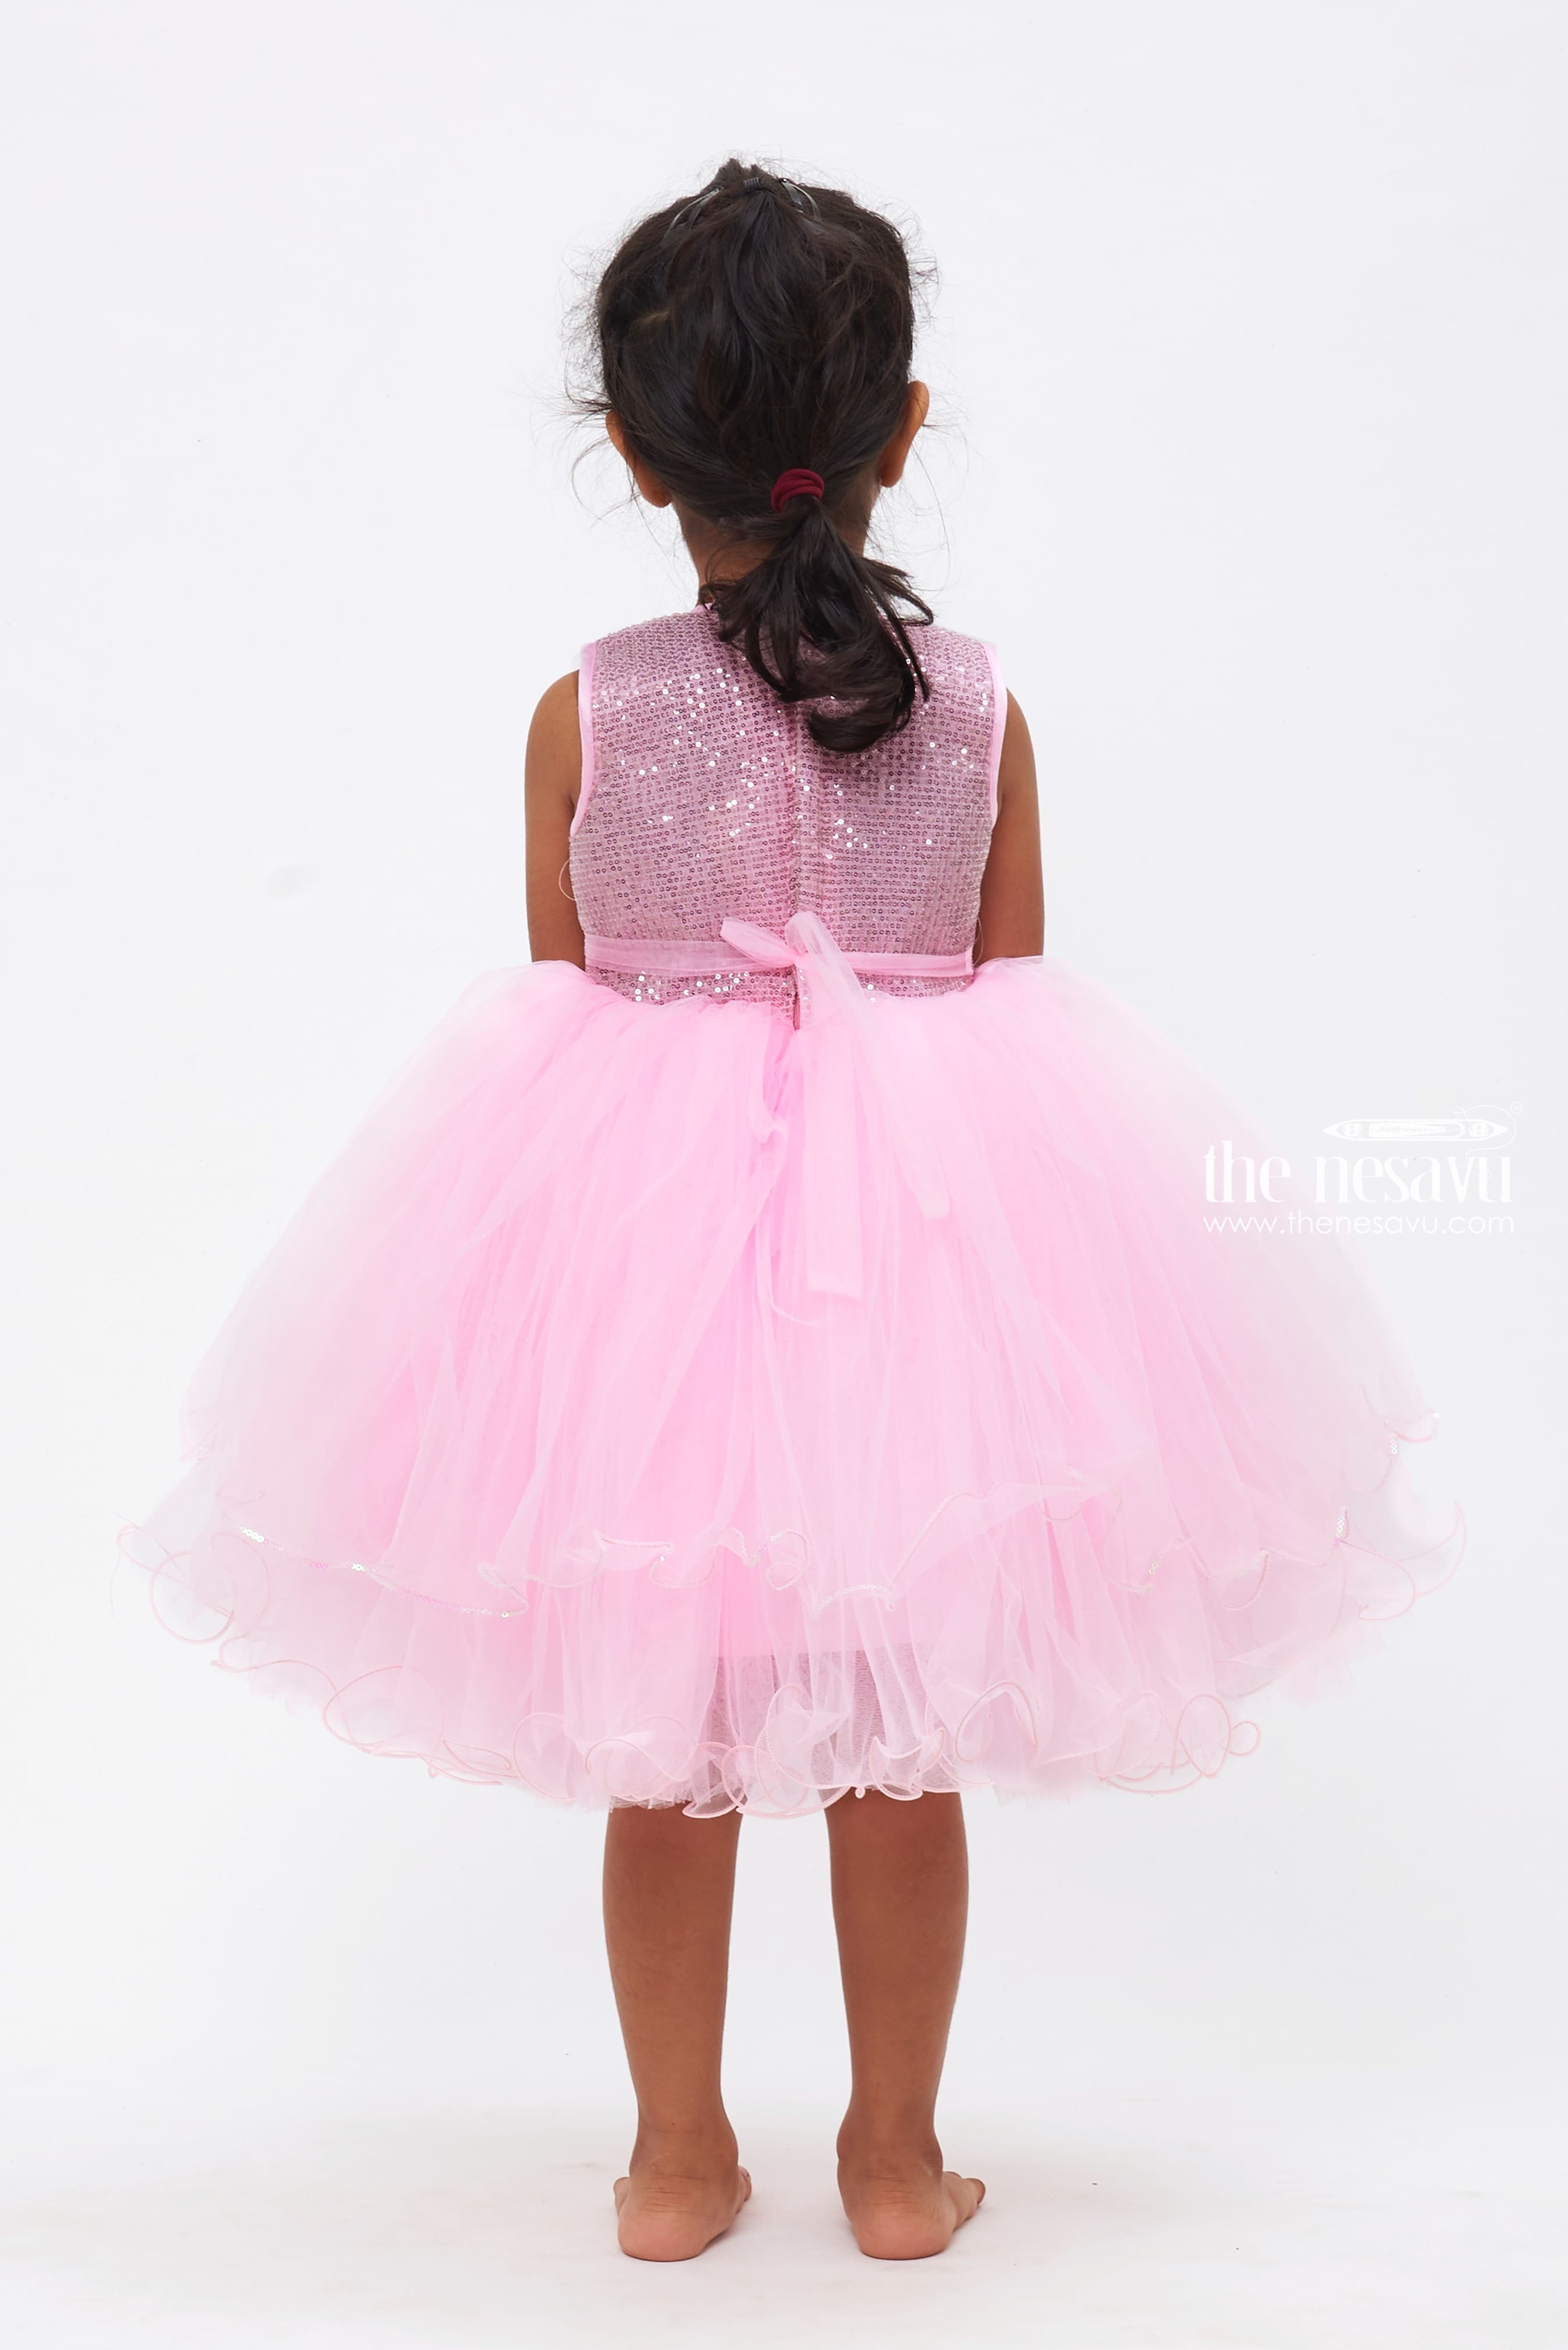 Buy Newborn Infant Girl Hot Pink and Black Tutu Dress Online at Beautiful  Bows Boutique